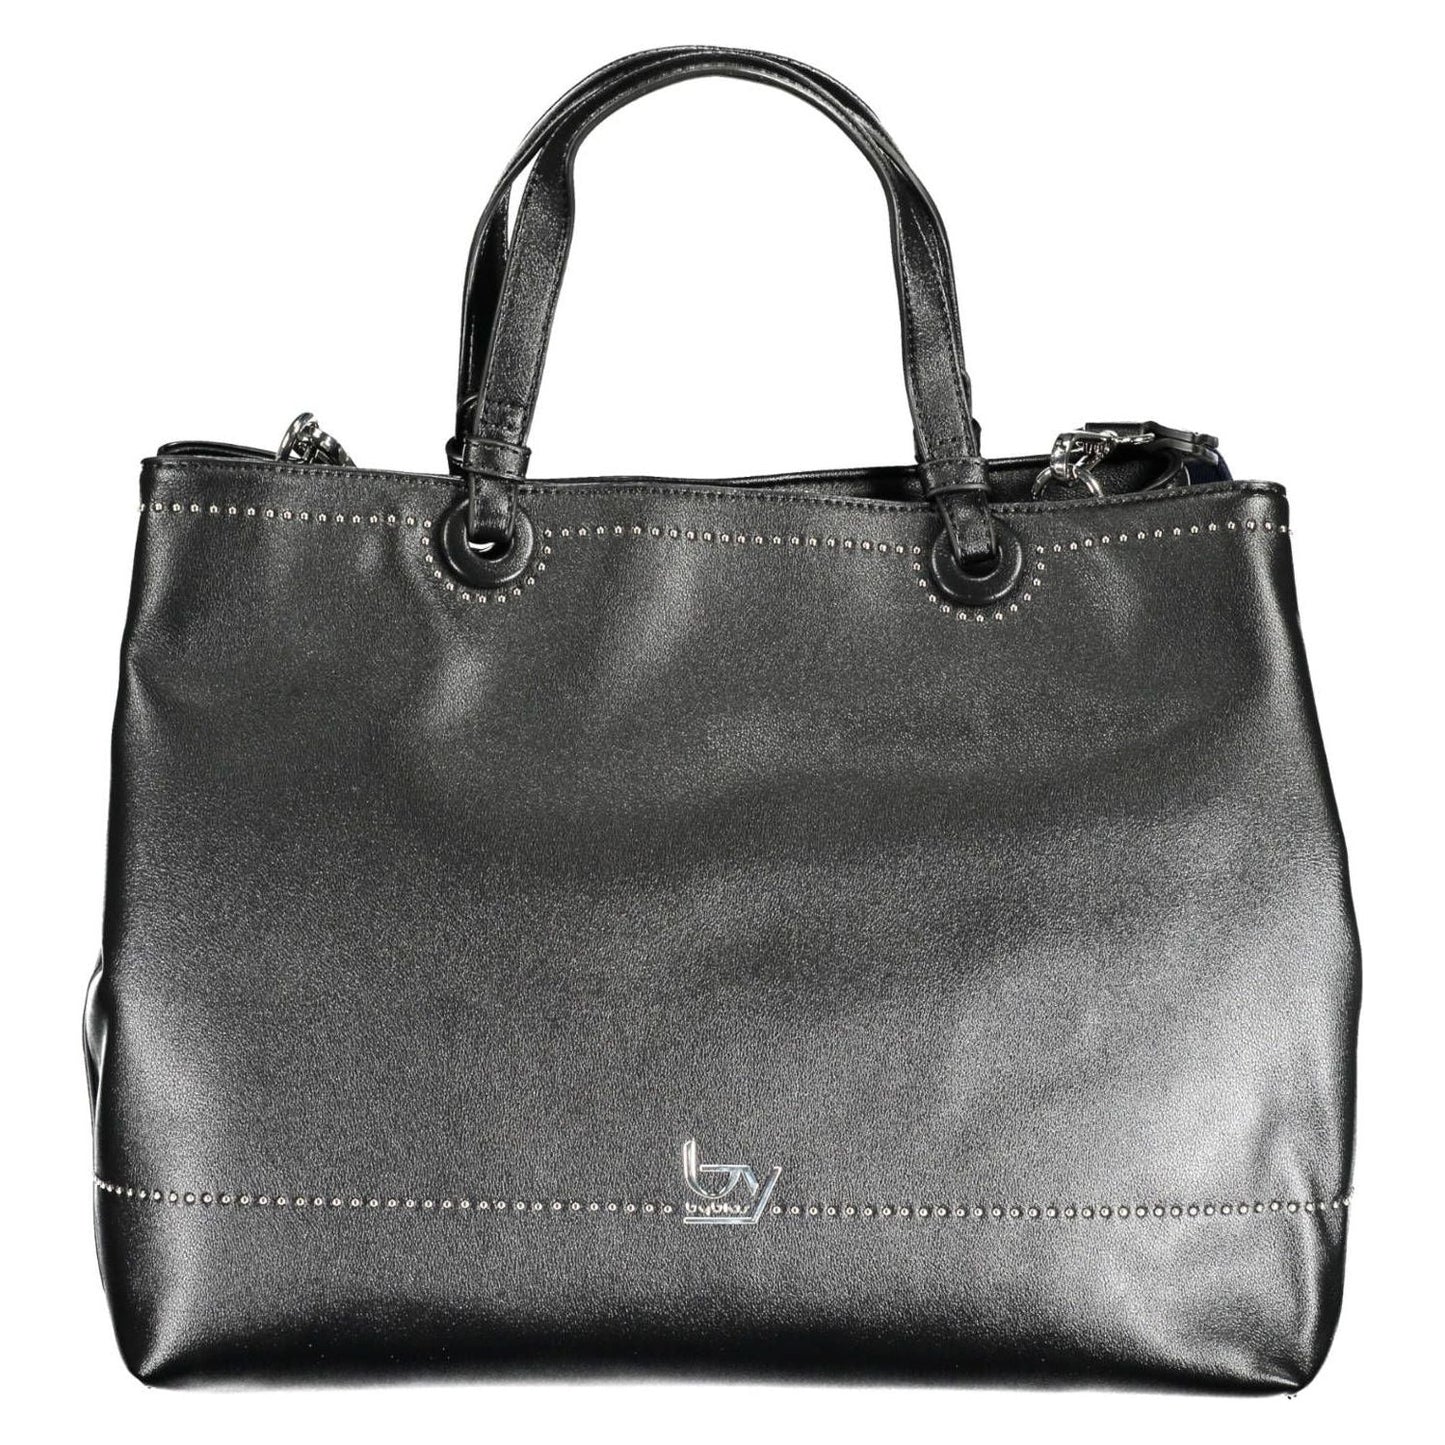 BYBLOS Chic Two-Handle City Bag with Contrast Detail chic-two-handle-city-bag-with-contrast-detail